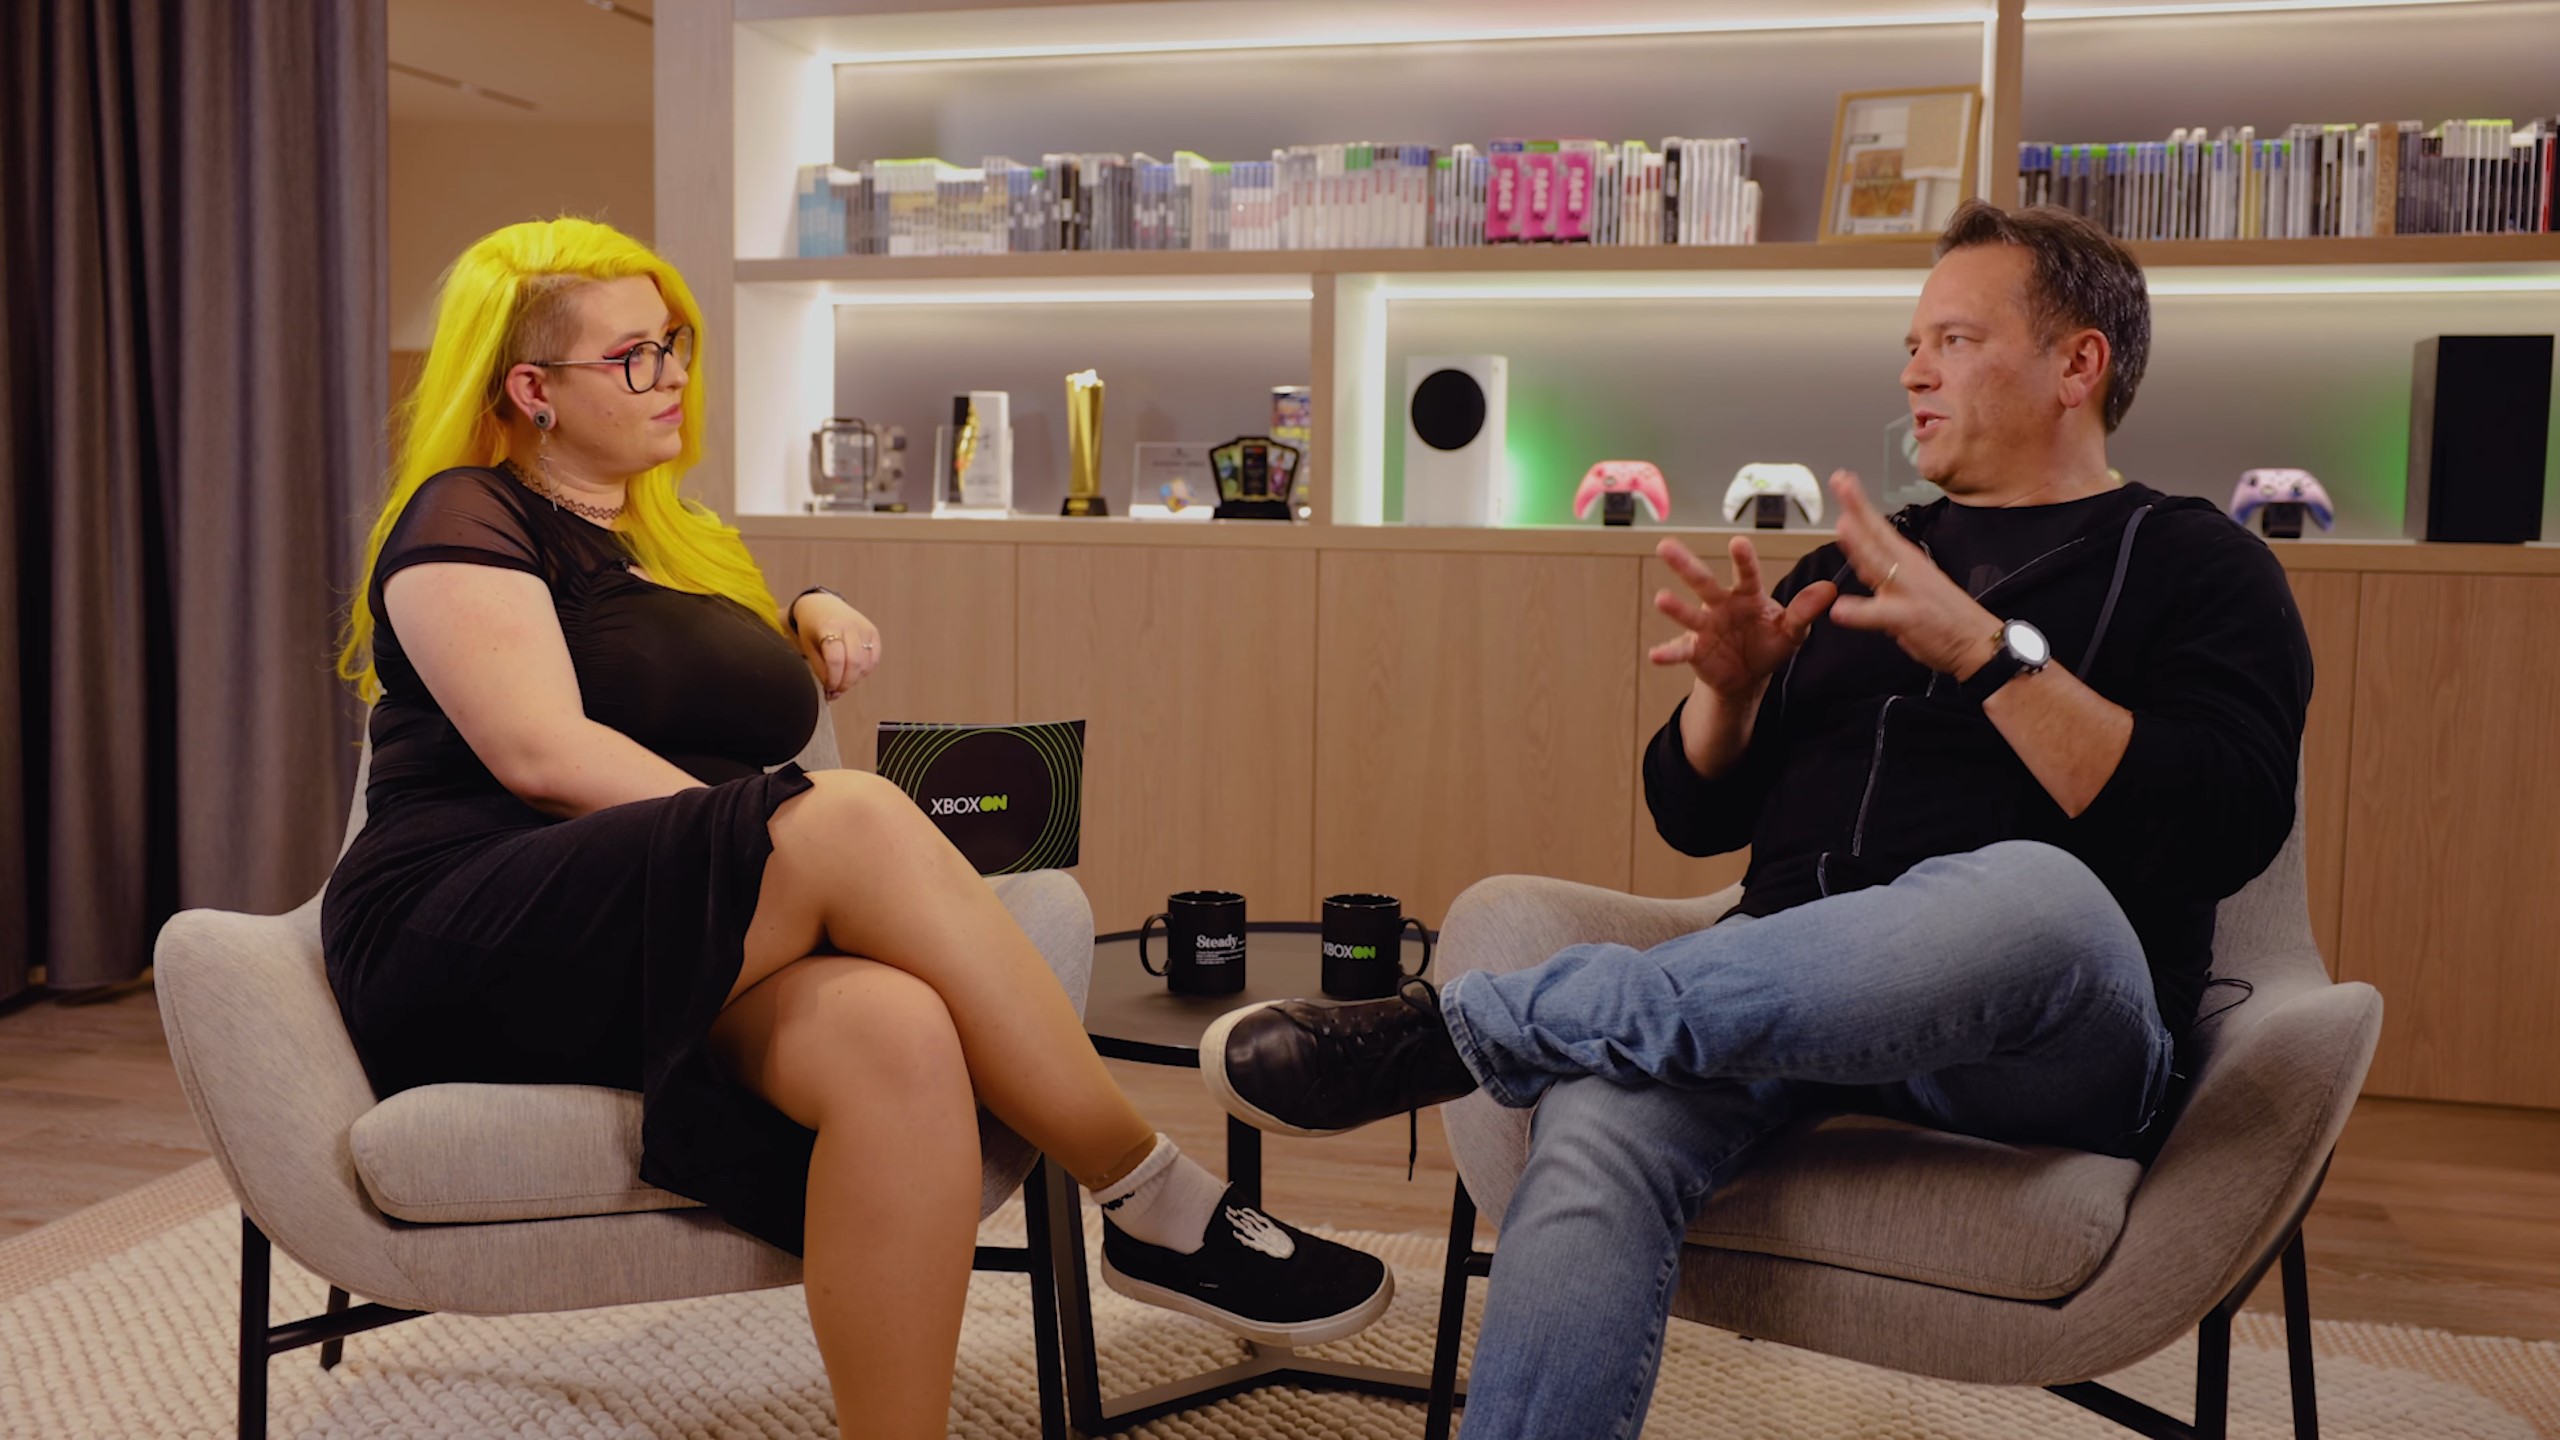 Xbox's Future: An Exclusive Interview with Phil Spencer